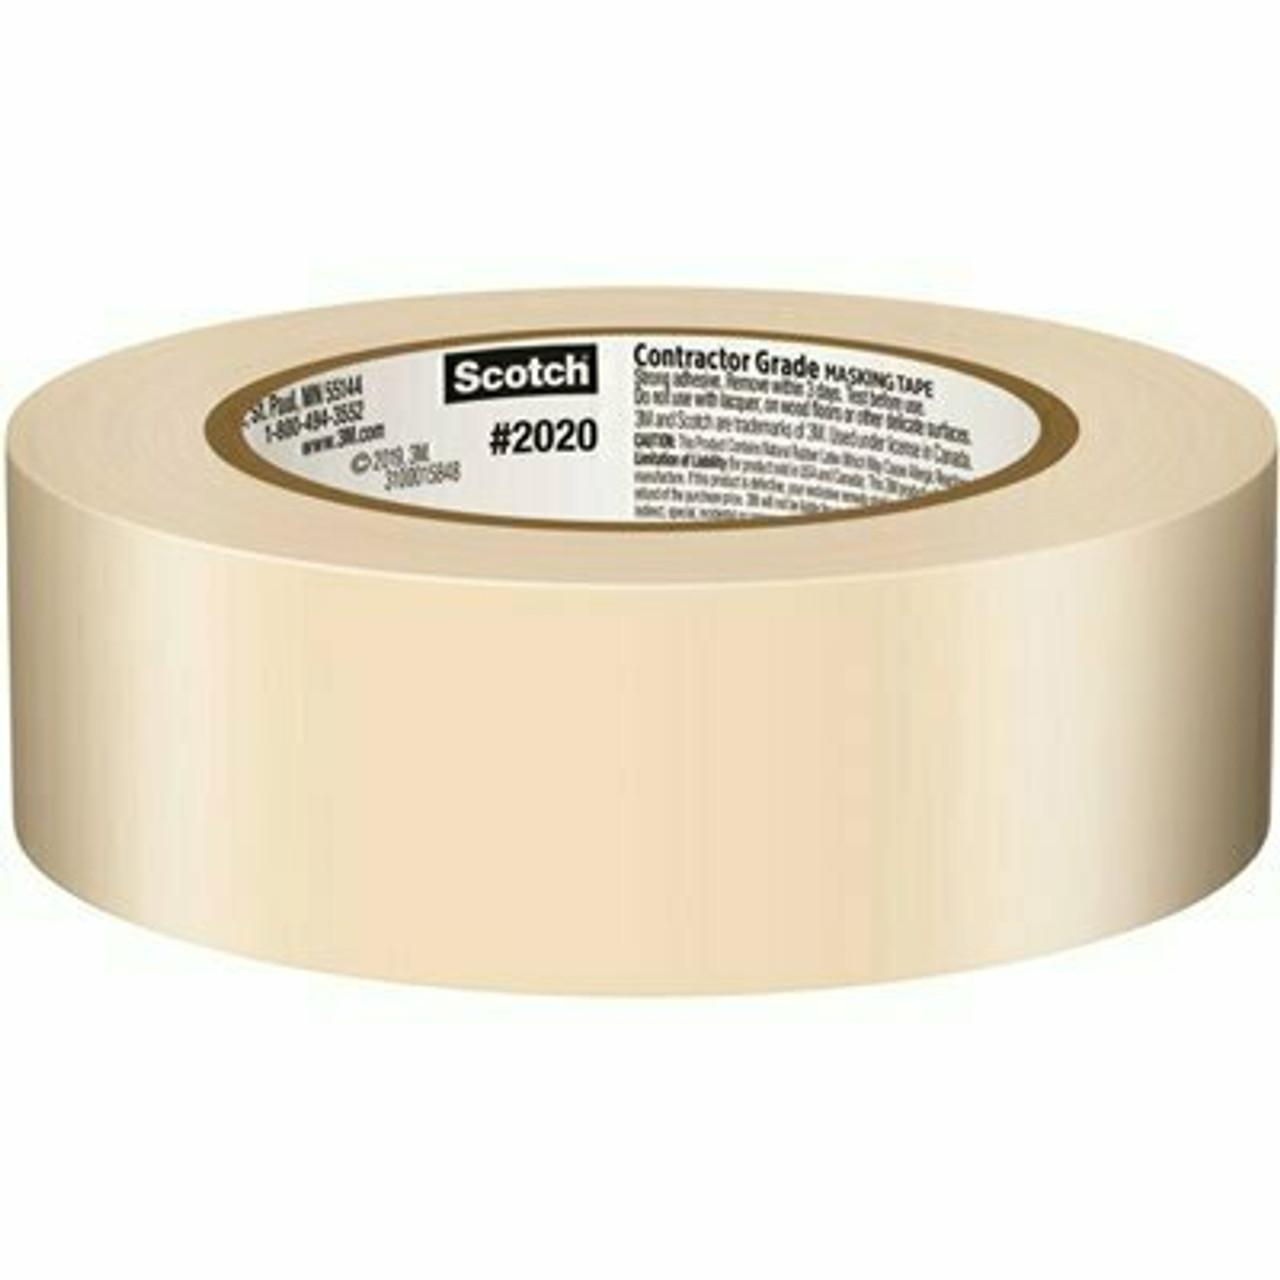 3M Scotch 1.41 In. X 60.1 Yds. Masking Tape For Production Painting (Case Of 24 Rolls)